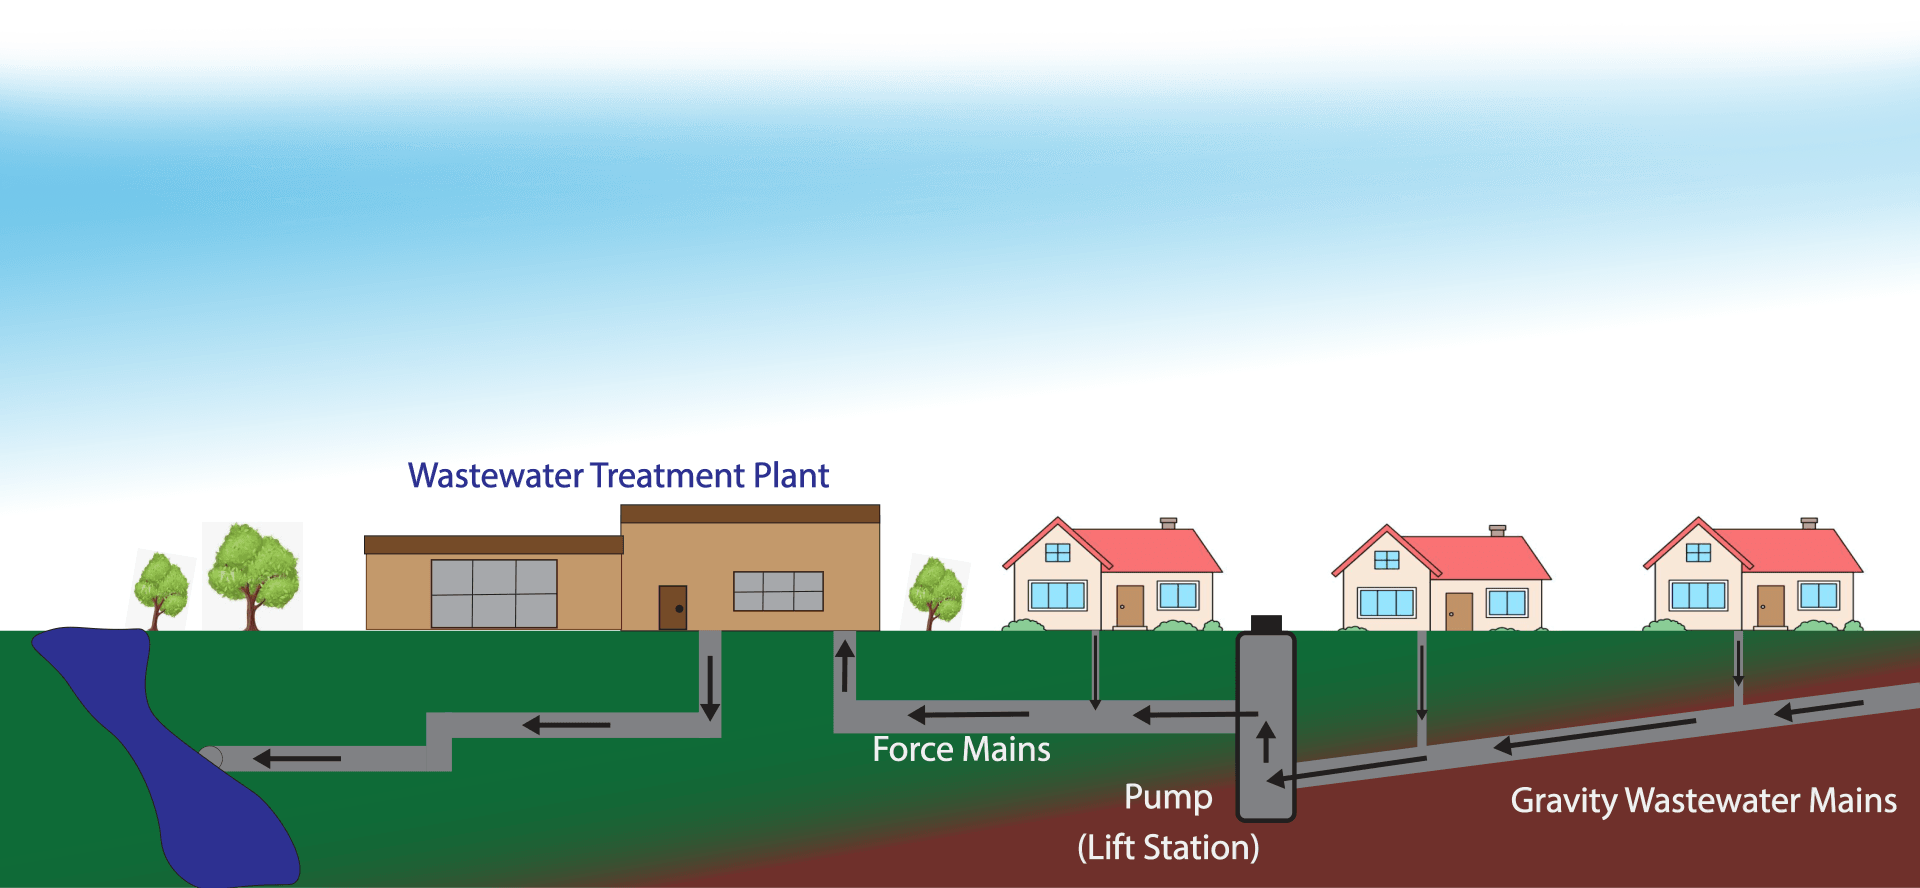 Wastewater Collection and Treatment Facilities